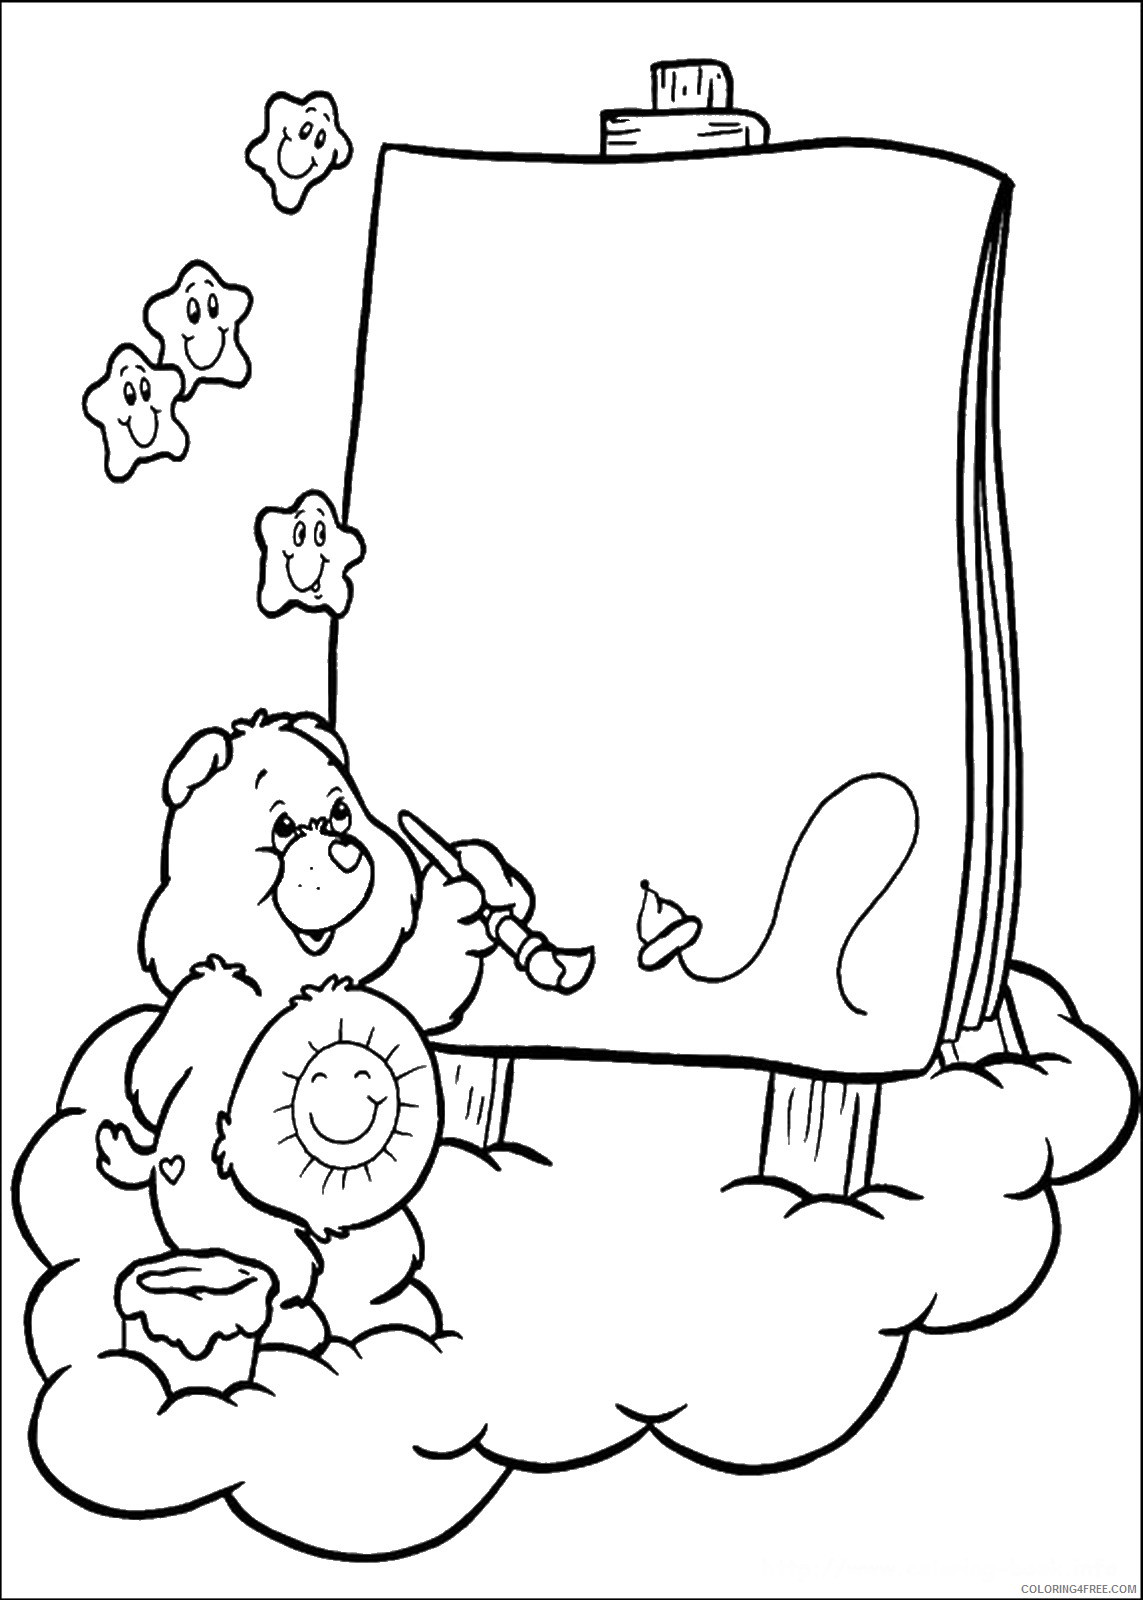 Care Bears Coloring Pages Cartoons care_bears_cl_23 Printable 2020 1559 Coloring4free